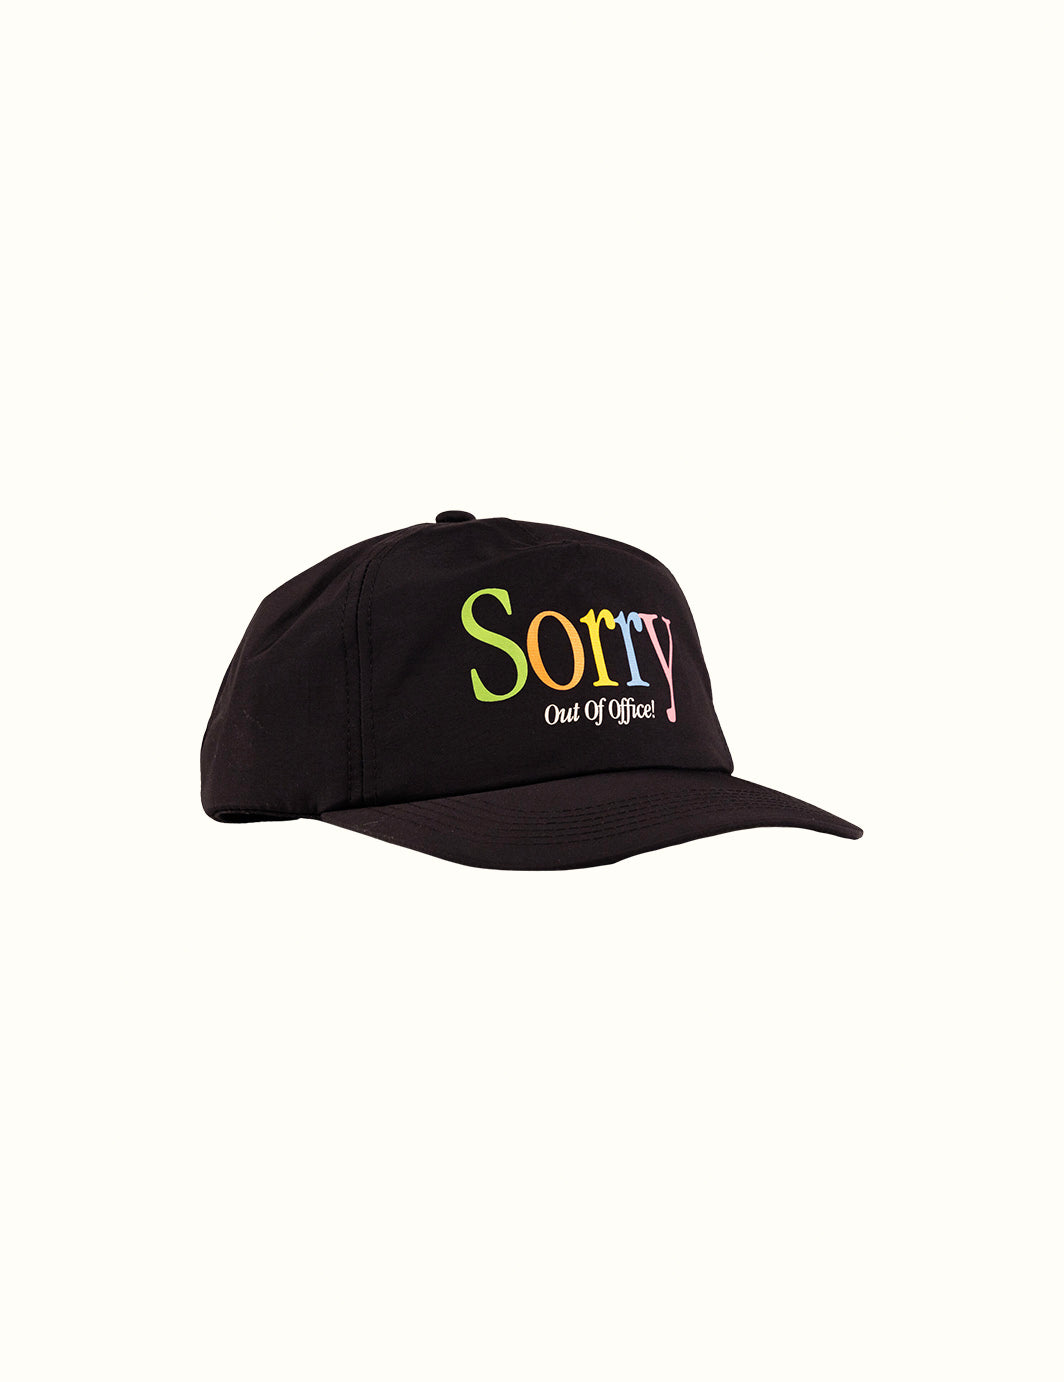 Sorry Out Of Office Hat - Black